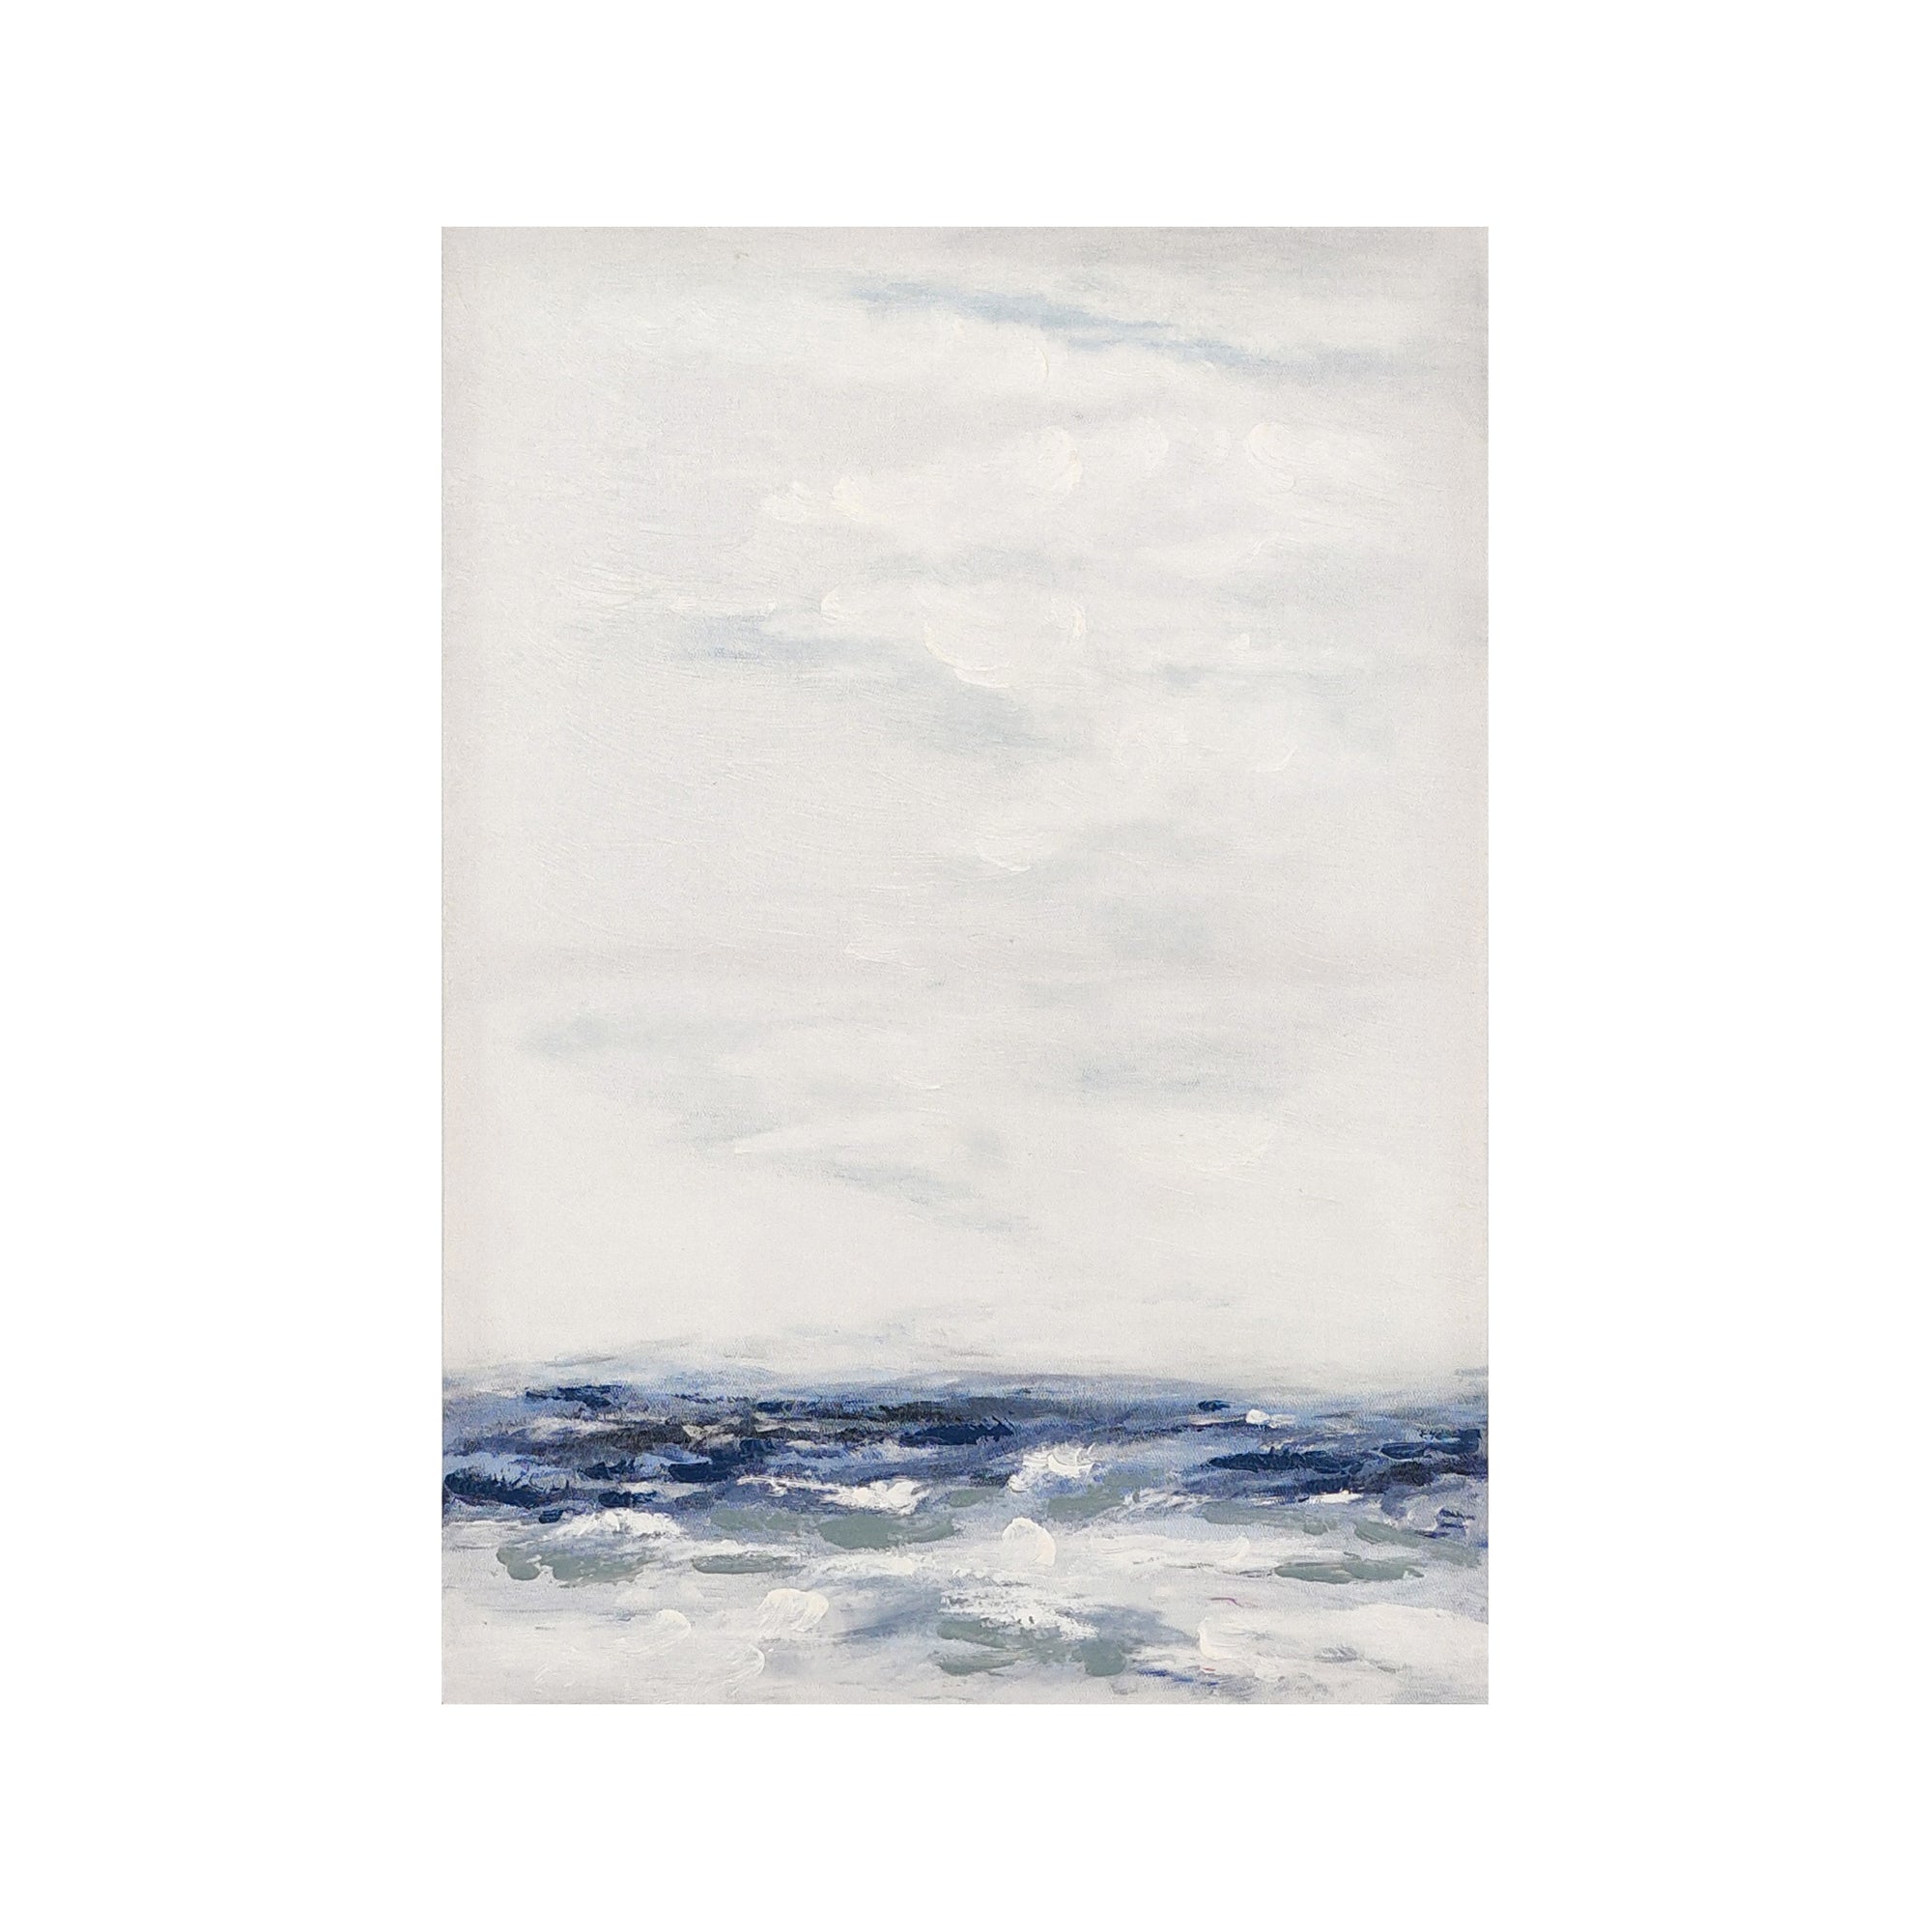 Abstract textured wall art affordable oil painting unframed white and blue sea portrait